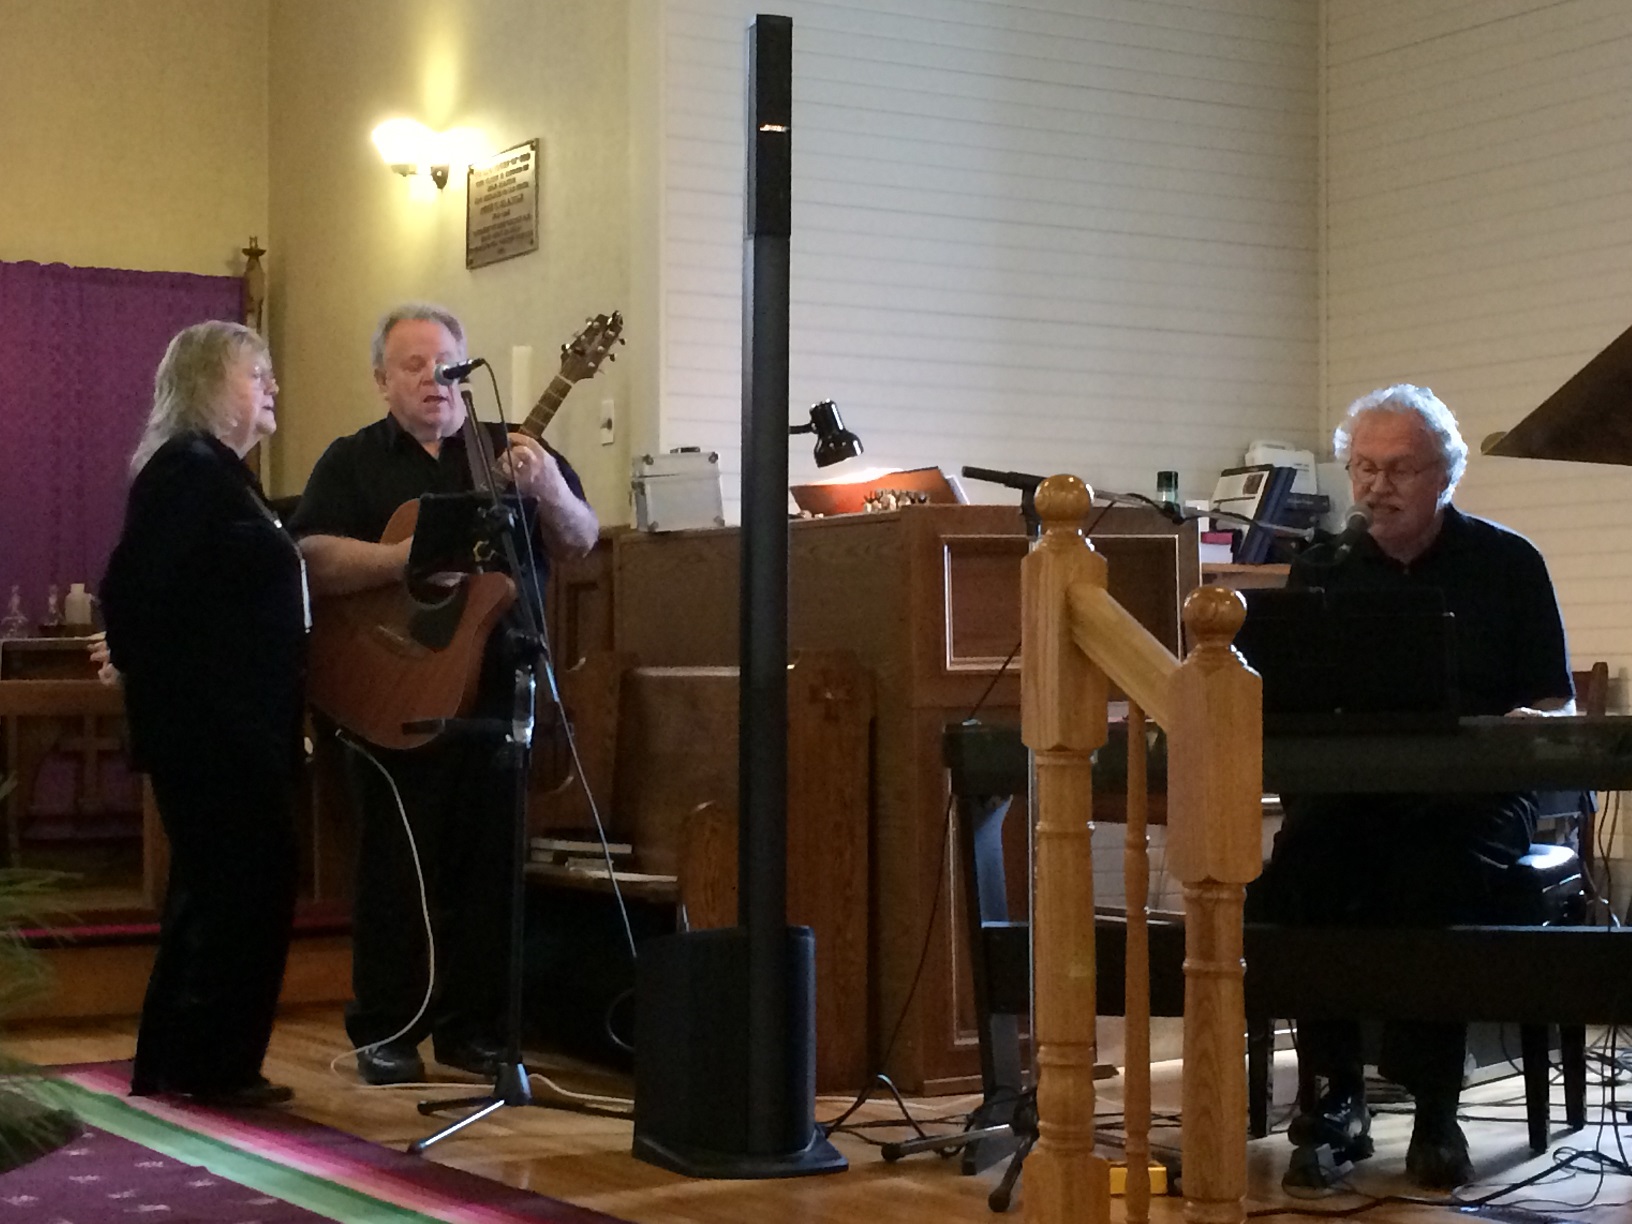 Third Sunday of Advent - Peter Grant was joined by Glenda Joy & Mike Purdy who performed Christmas Carols